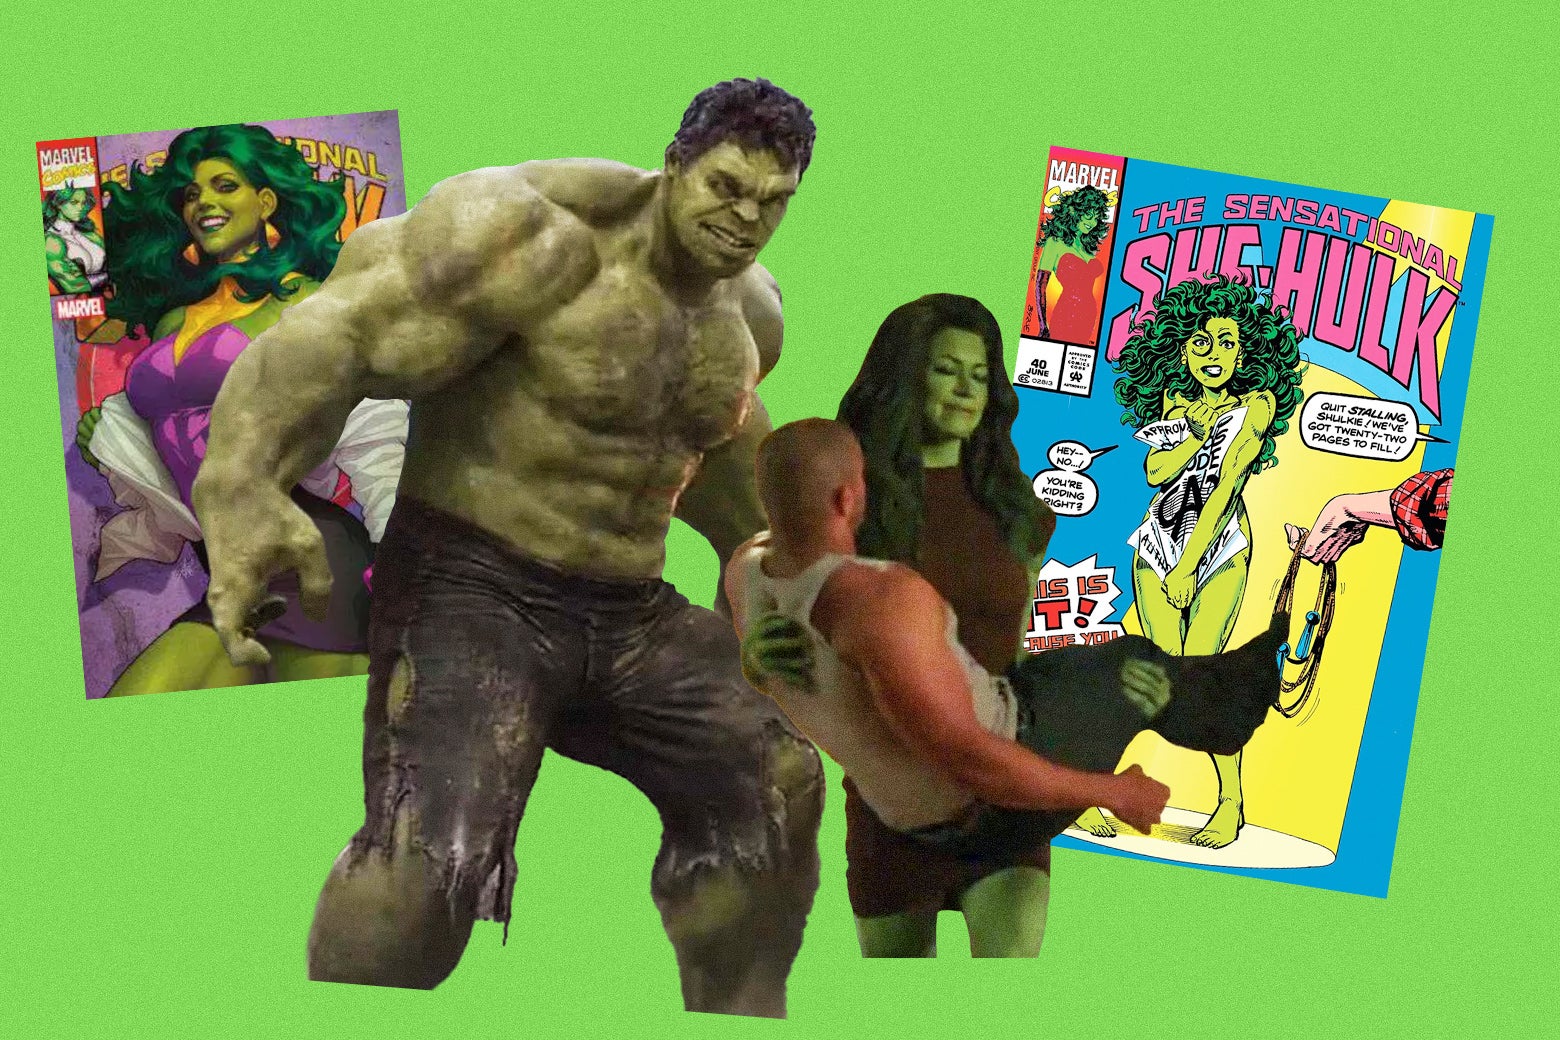 Hulk and She-Hulk a history of the sex lives of the Marvel characters. pic photo pic